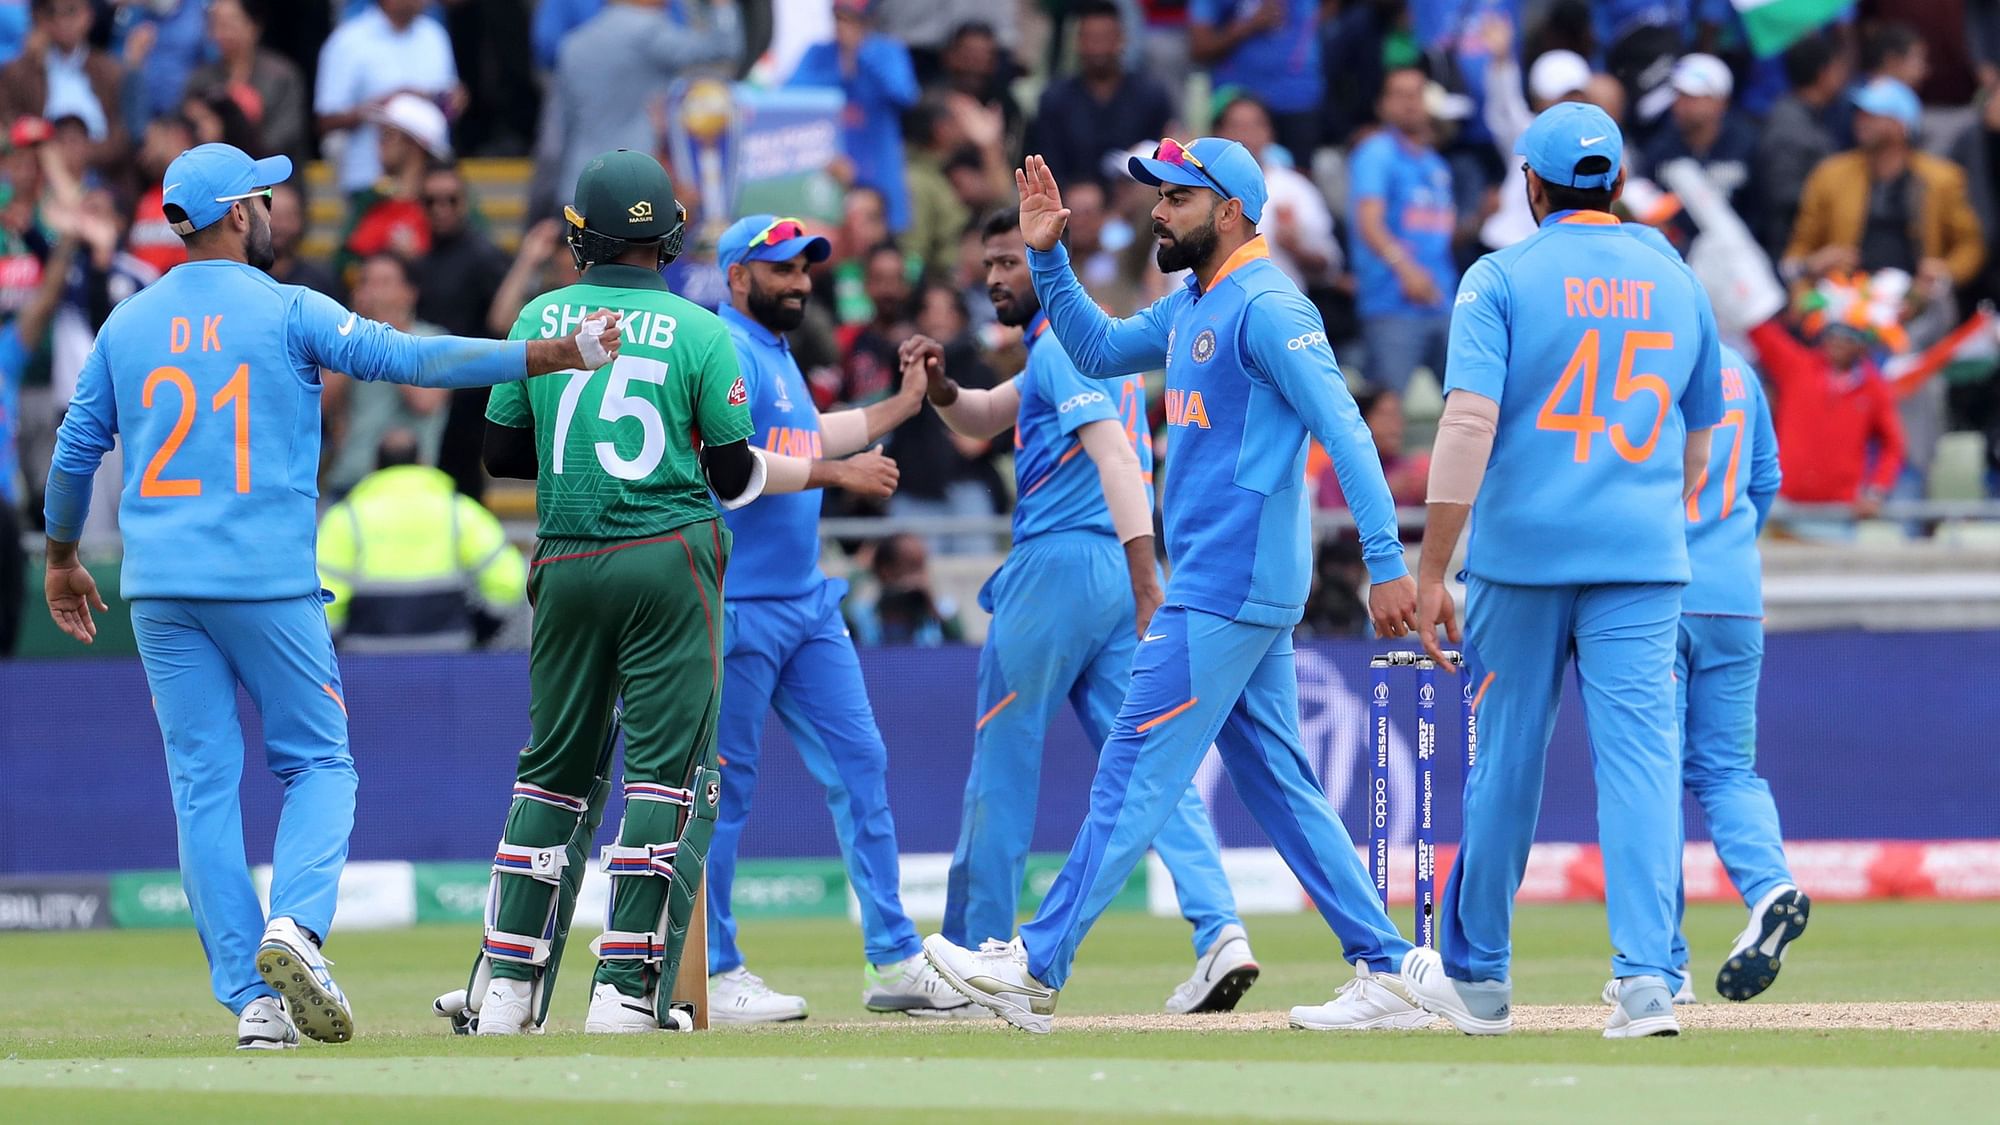 With this win, India become the second team in the competition after Australia  to enter the semis.